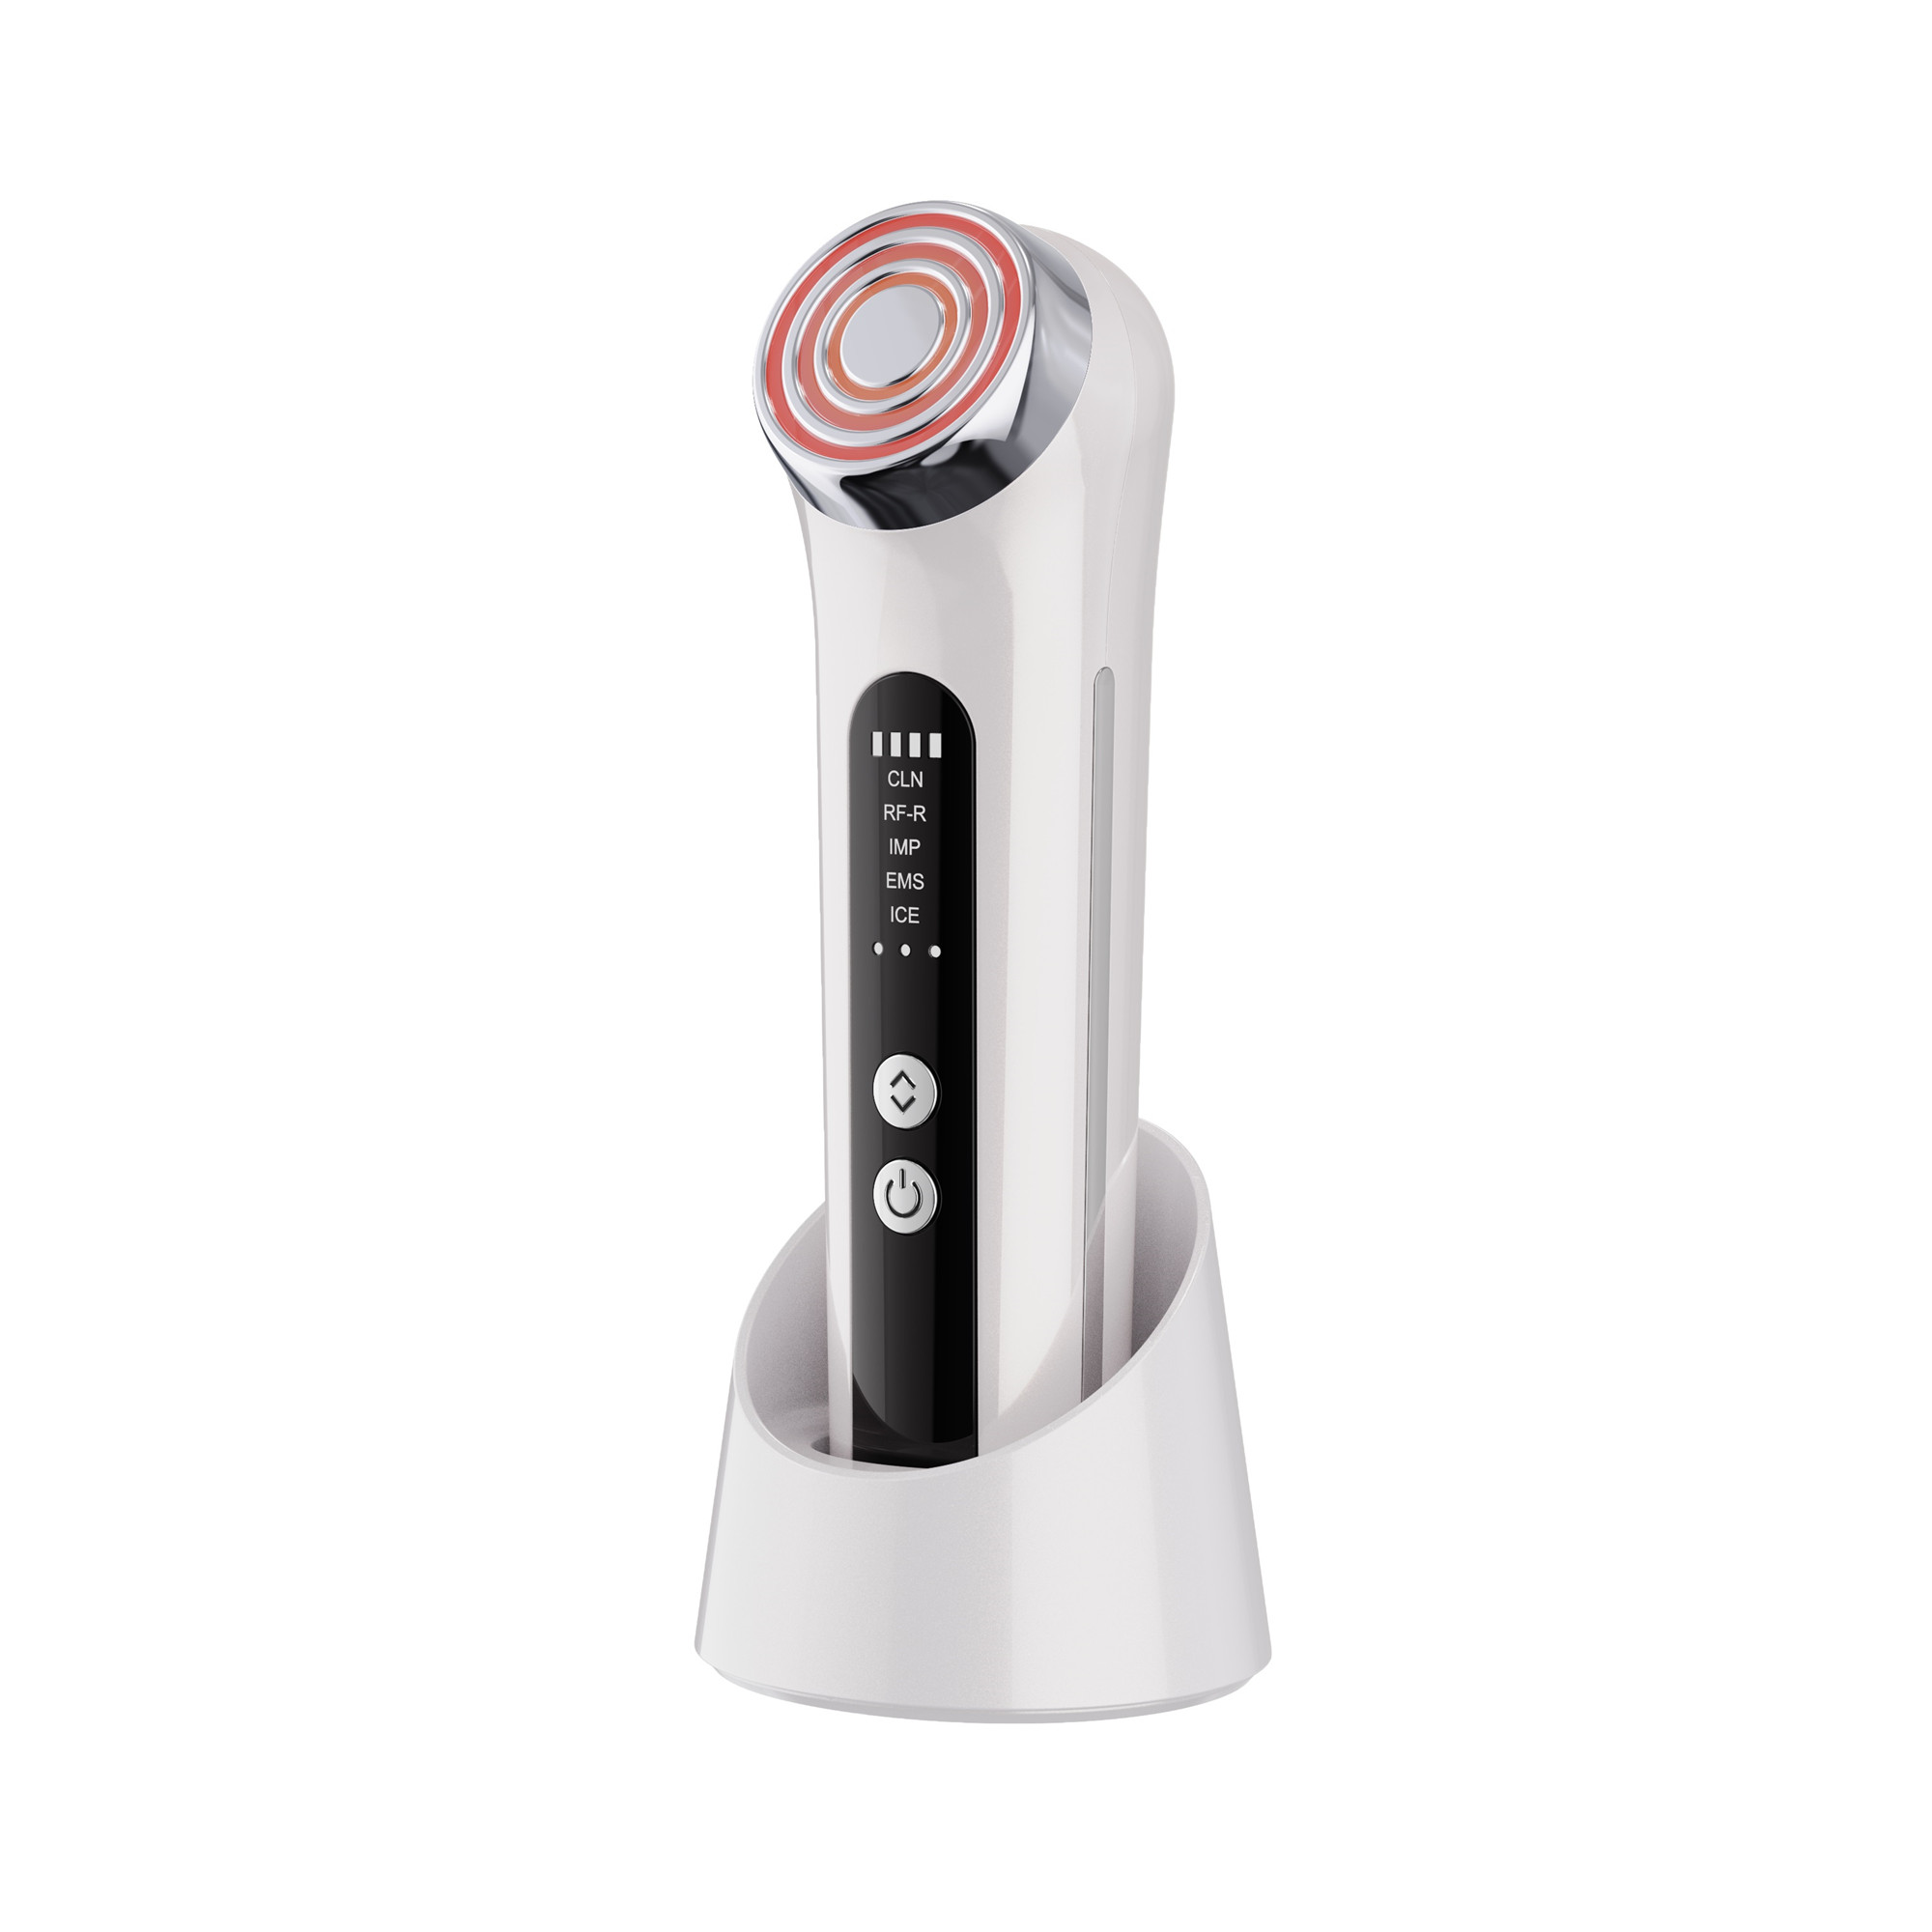 Patent Design 5 in 1 Radio Frequency Skin Tightening Face Wash Machine with Ice Cooling-KM19